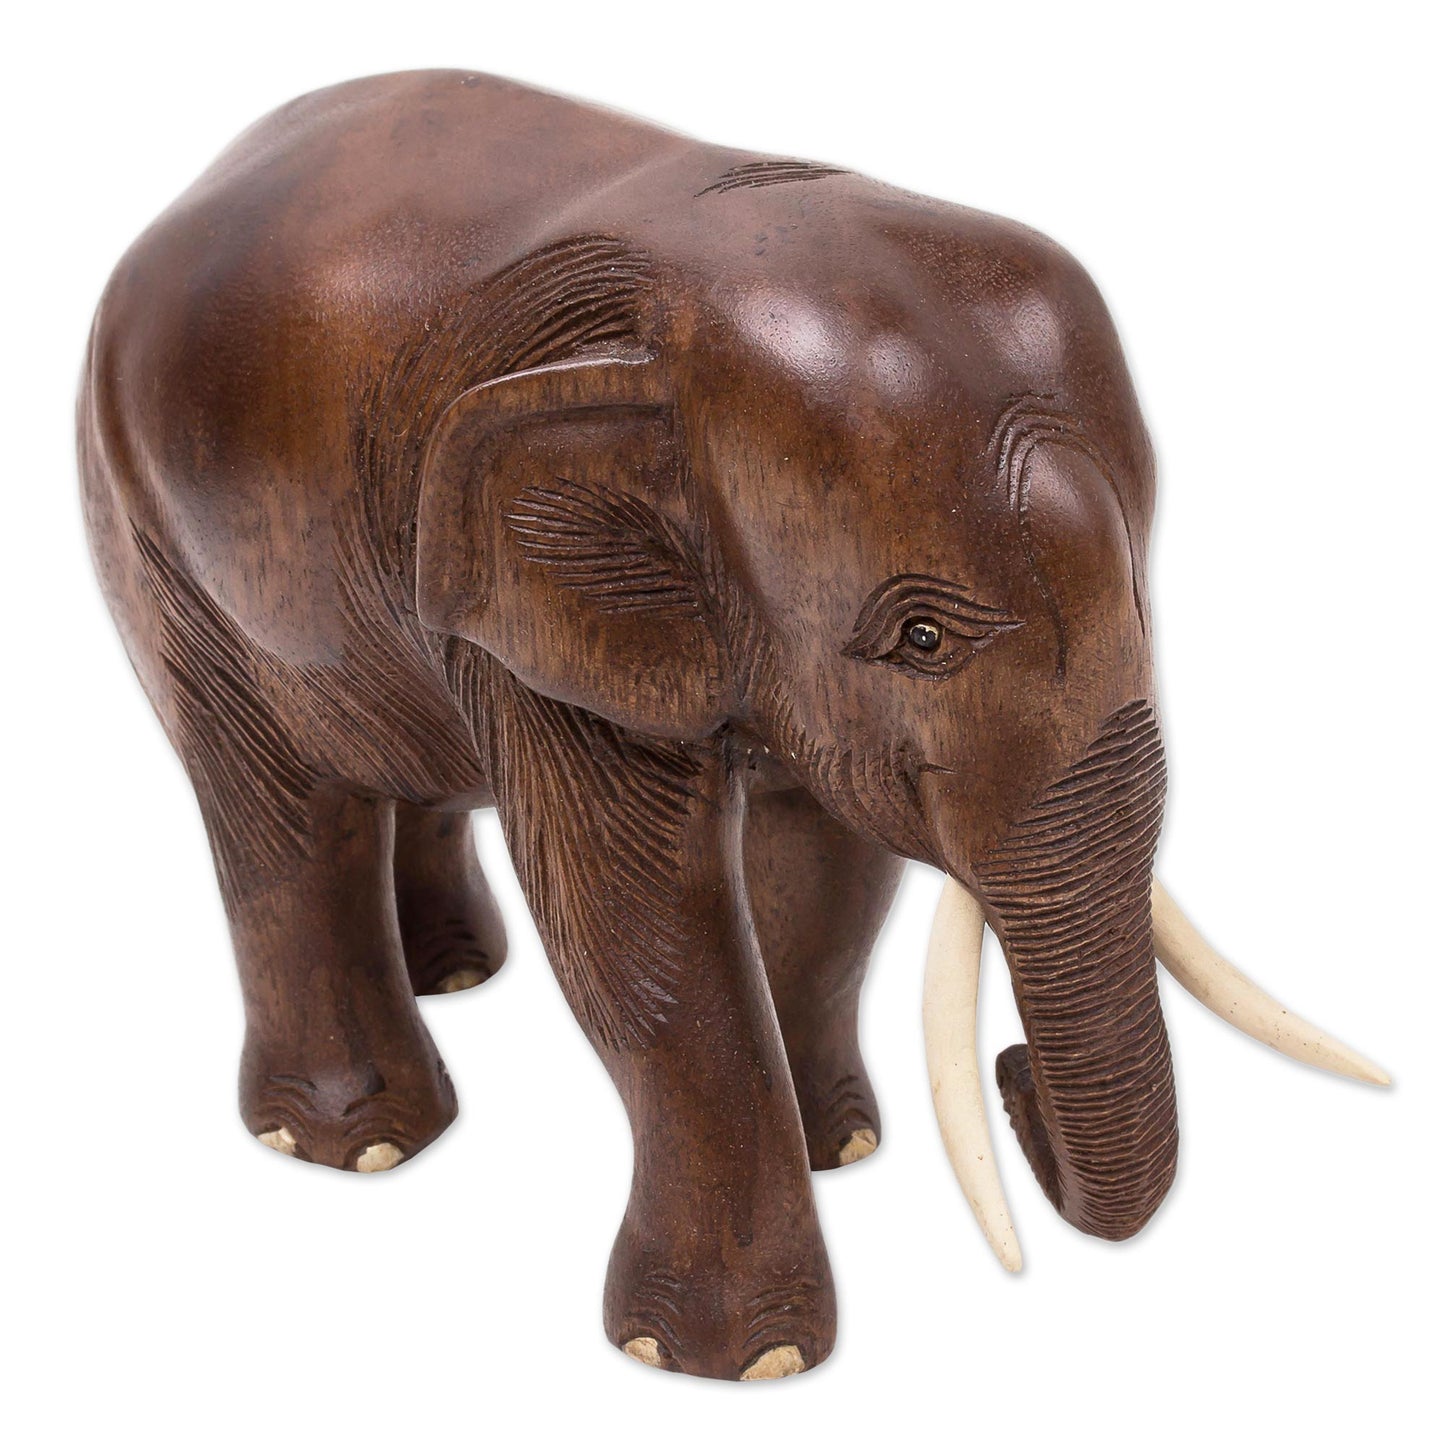 Relaxed Elephant Hand Made Wood Elephant Sculpture from Thailand